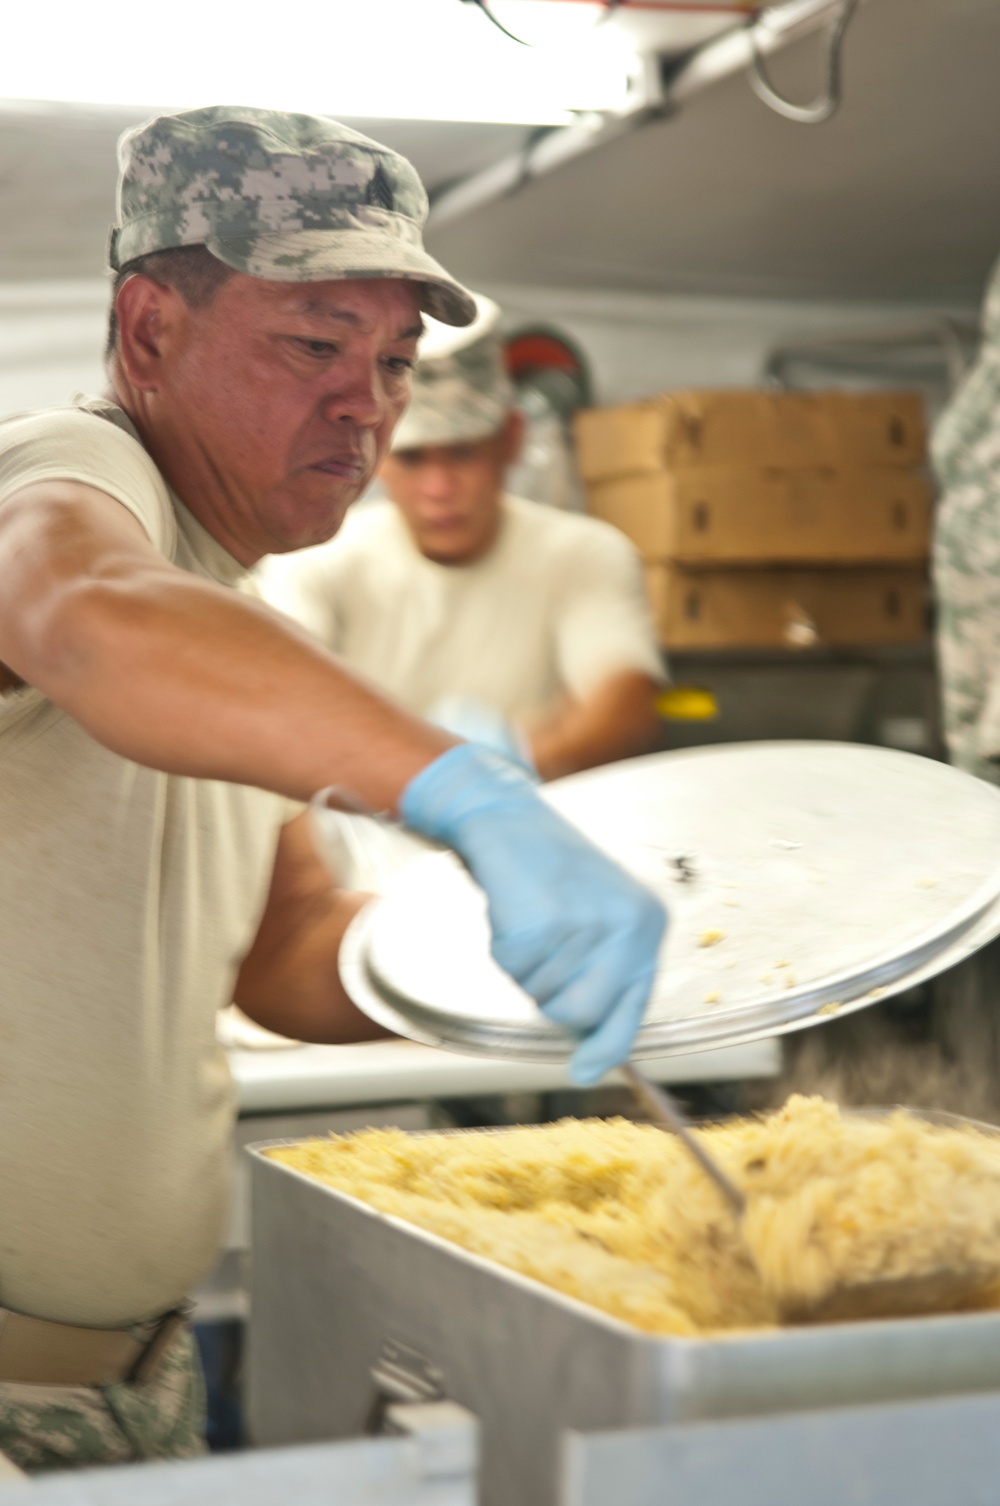 Service food specialist learn from one another